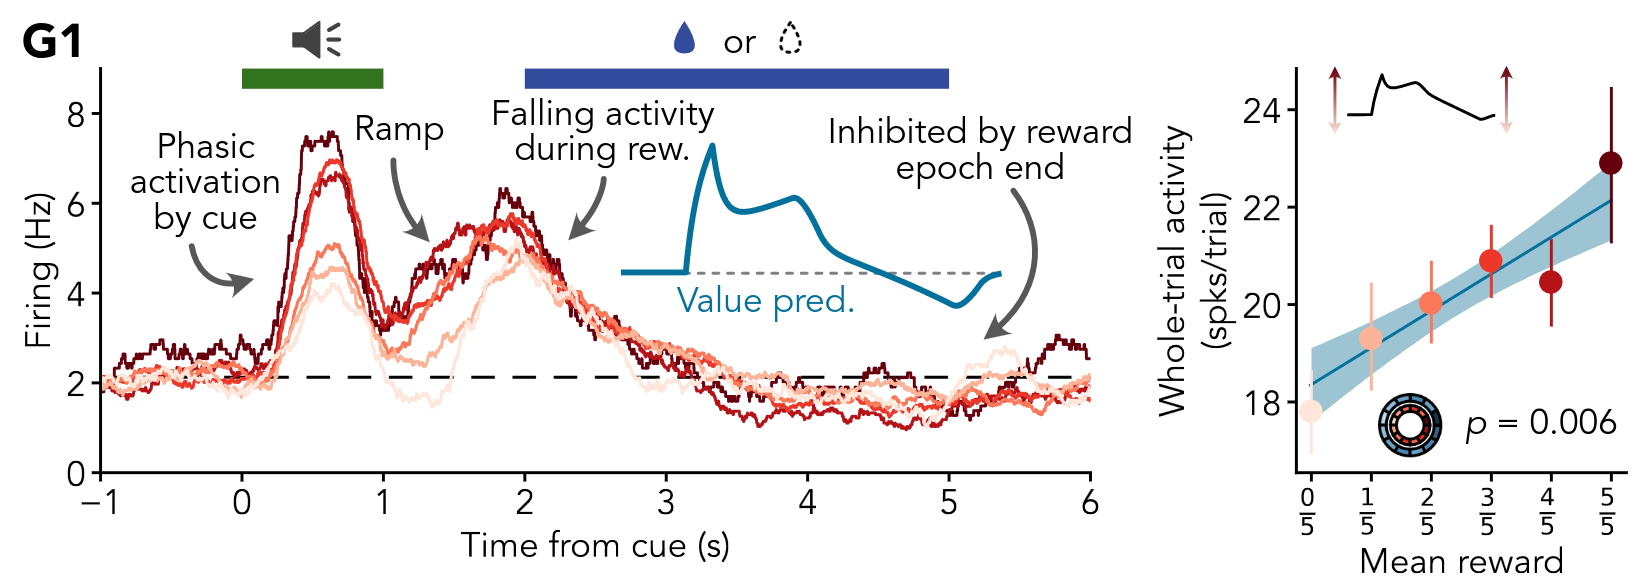 Comparison of activity and theory predictions for an example serotonin neuron. Both show a spike in activity associated with a reward-predicting cue, a ramp leading up to the delivery of a reward, and falling activity during the reward itself.